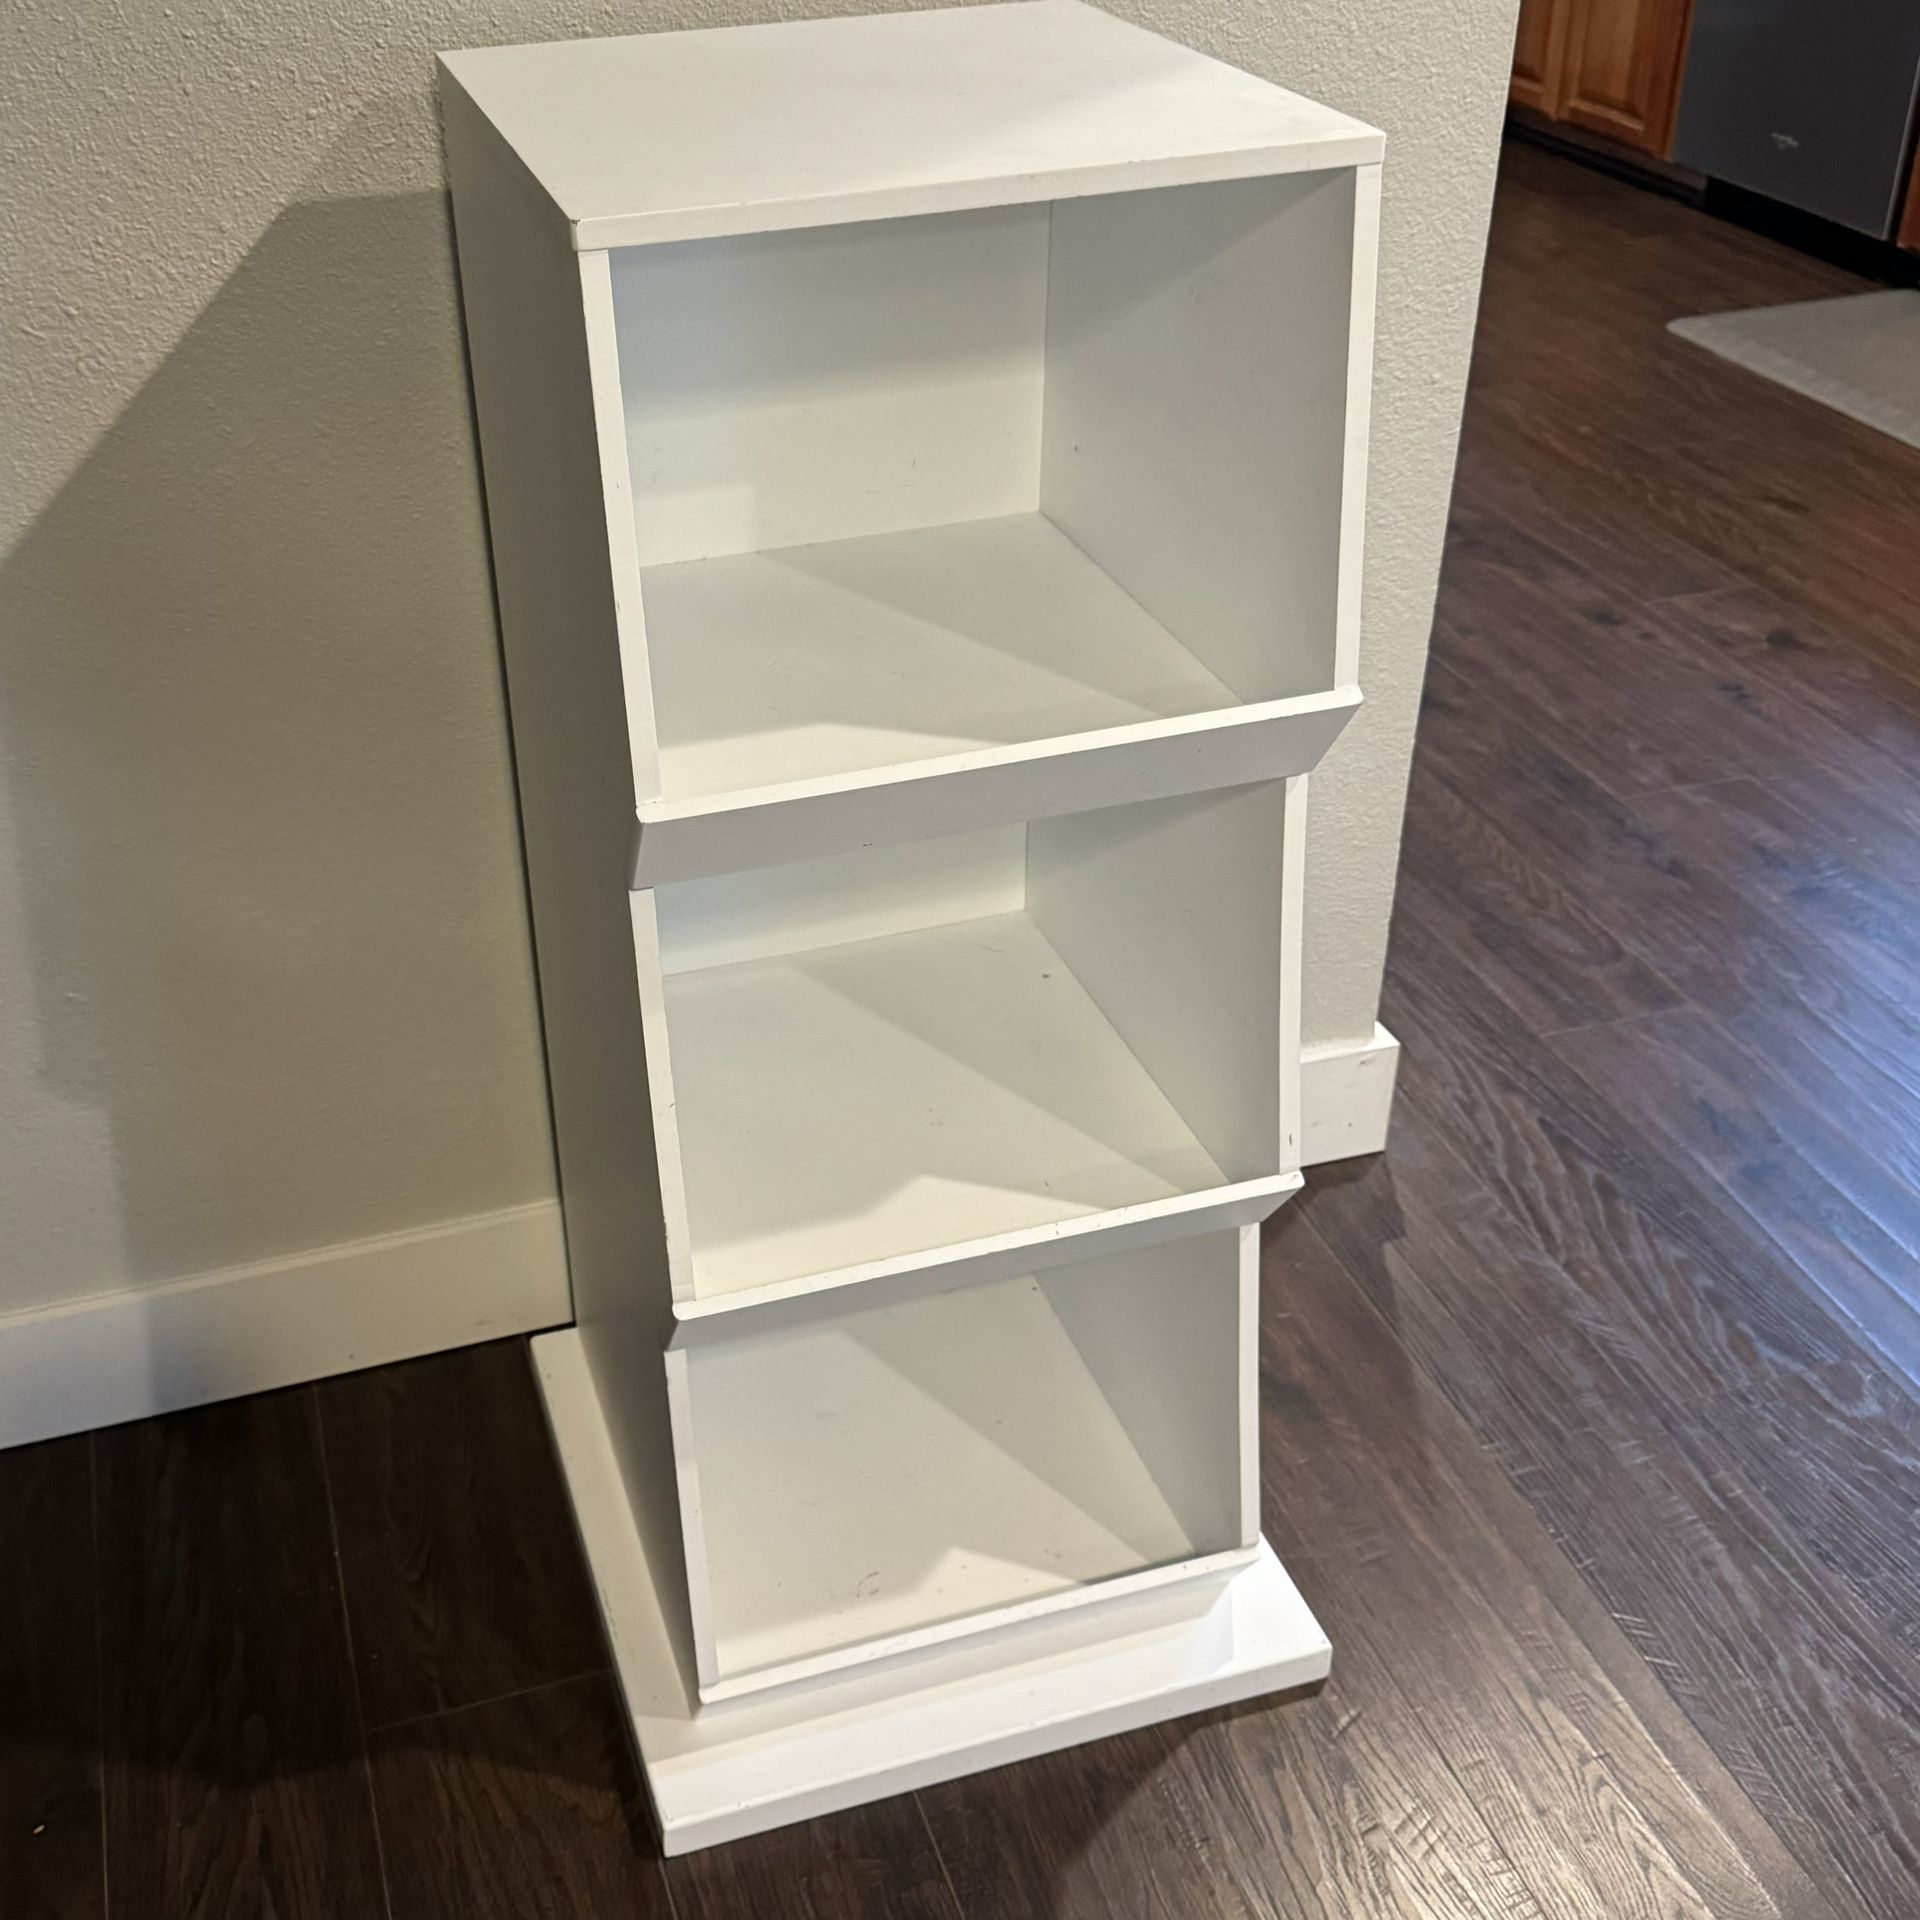 White Wooden Storage Bins For Toys, Shoes, Etc, Closet Storage Shelves Cabinet